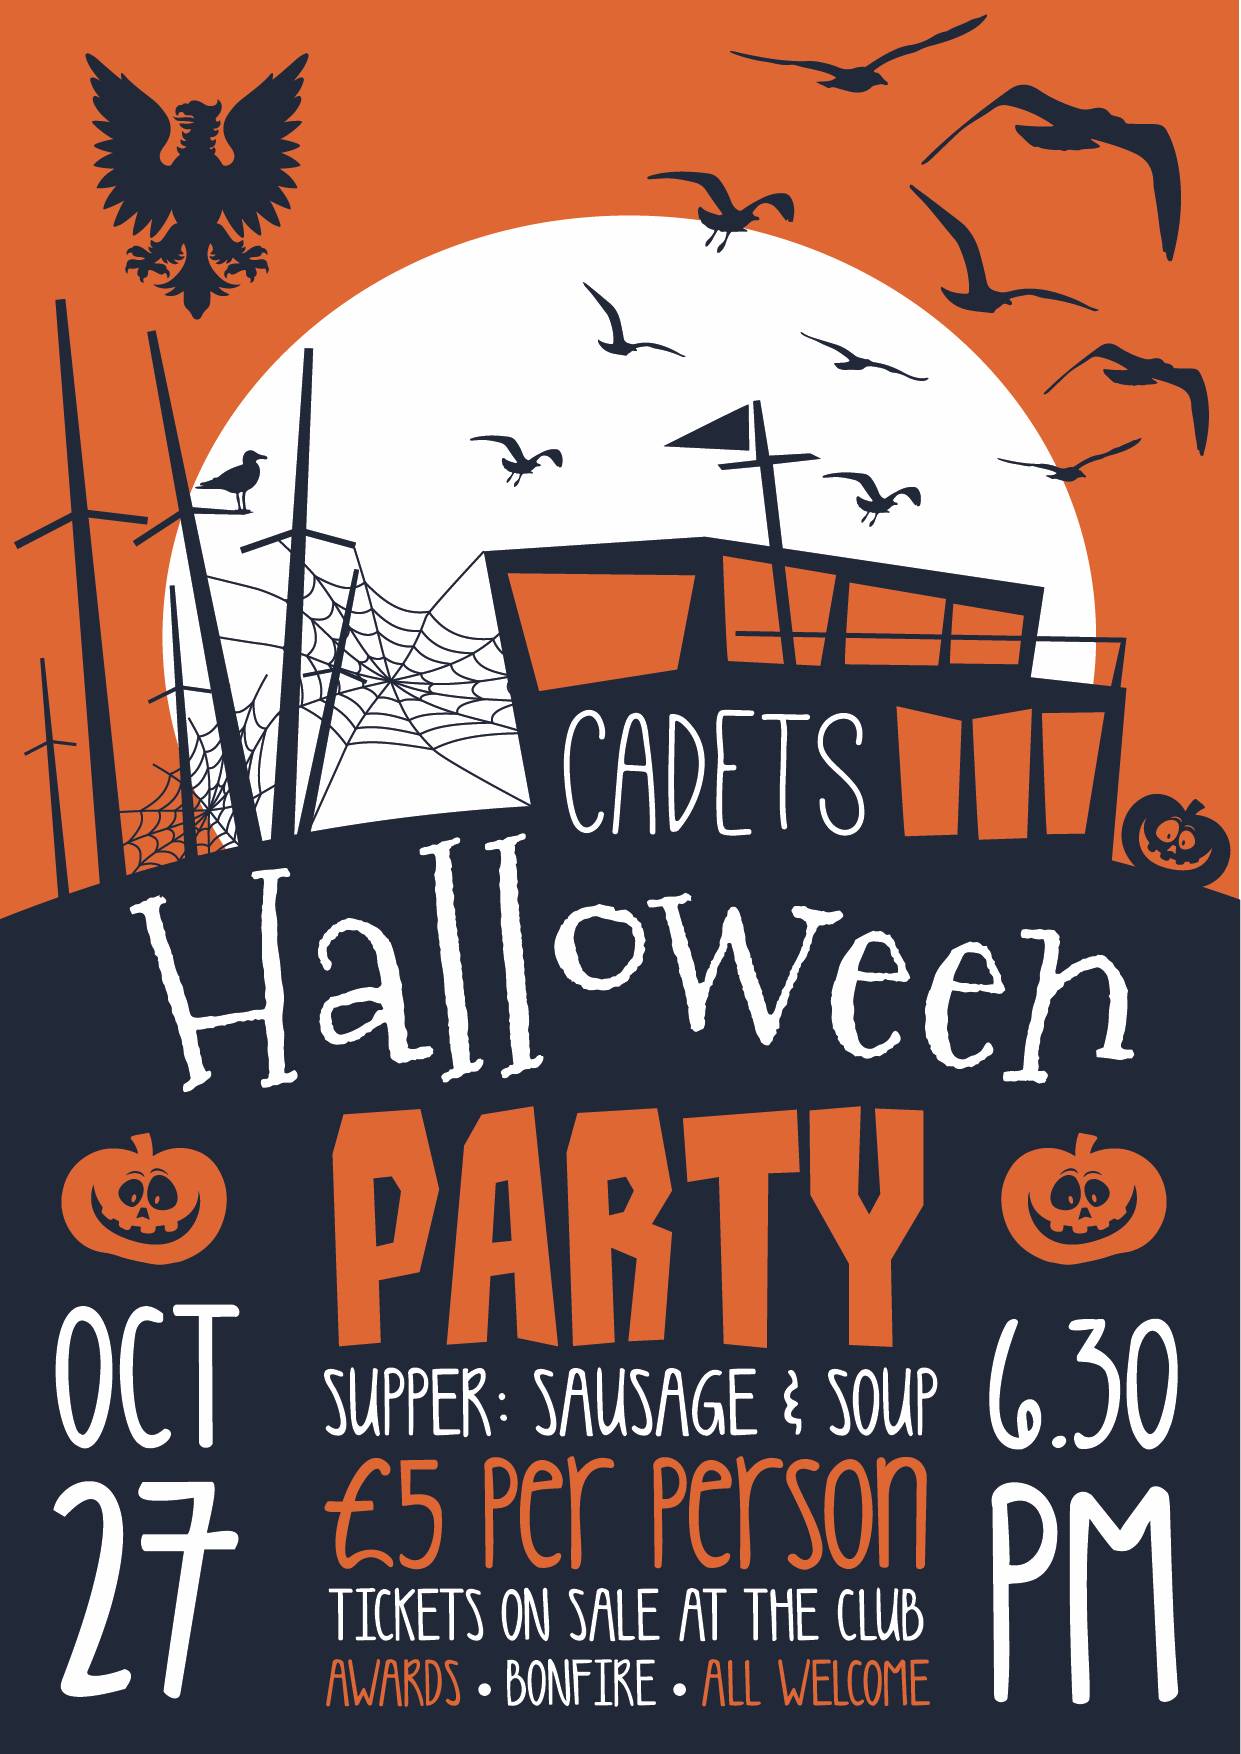 Halloween Party - Pevensey Bay Sailing Club